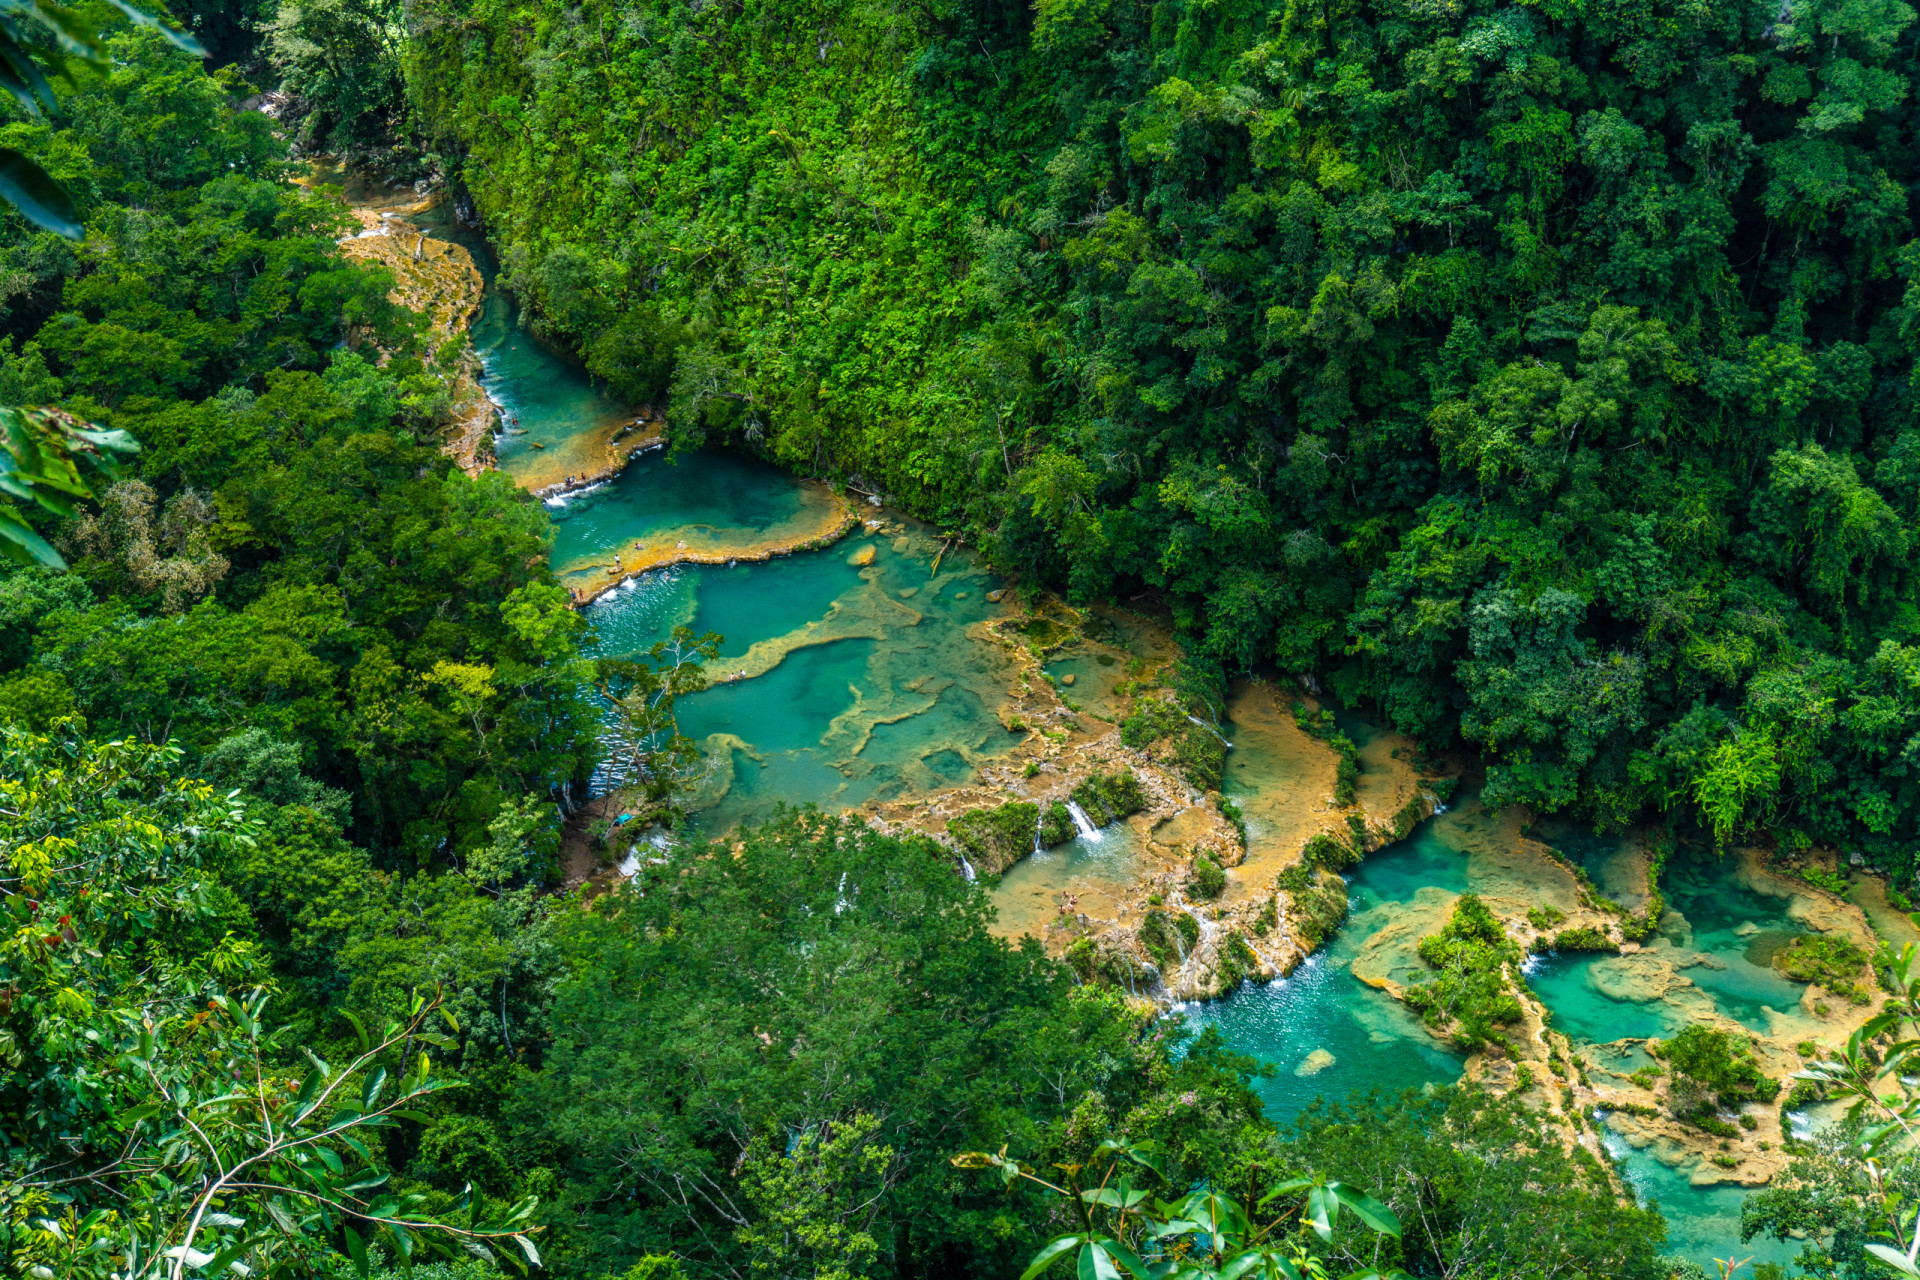 <p>Tucked away in the dense jungle of northern Guatemala is a natural wonder comprising a series of amazing blue rock pools and waterfalls known as Semuc Champey.</p>